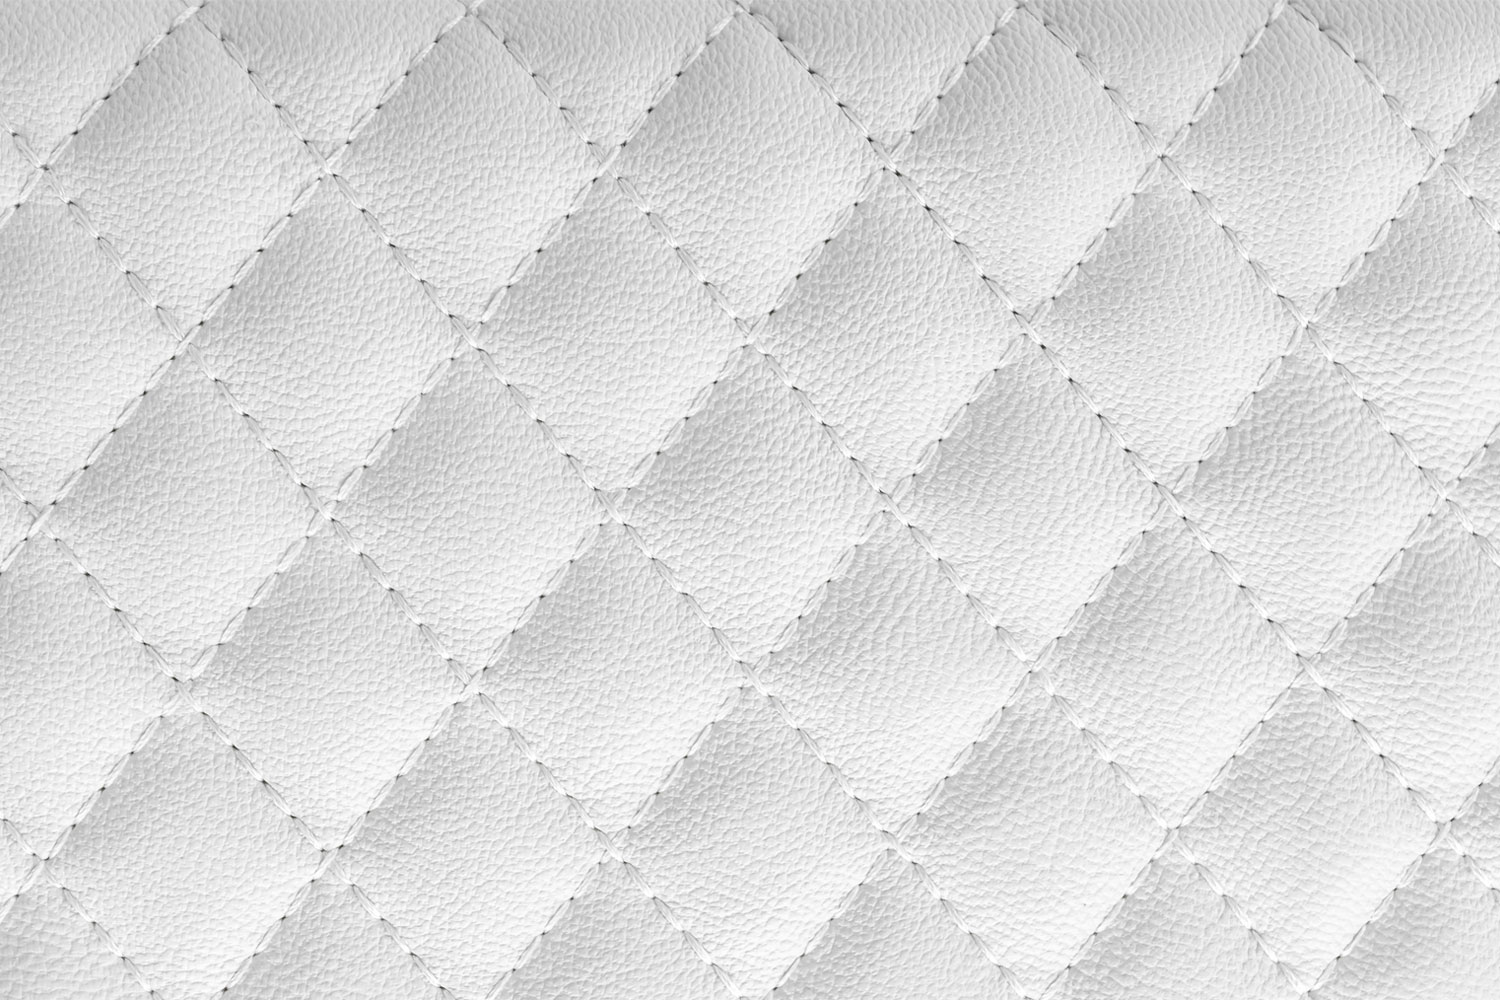 White leather texture luxury background 20830250 Stock Photo at